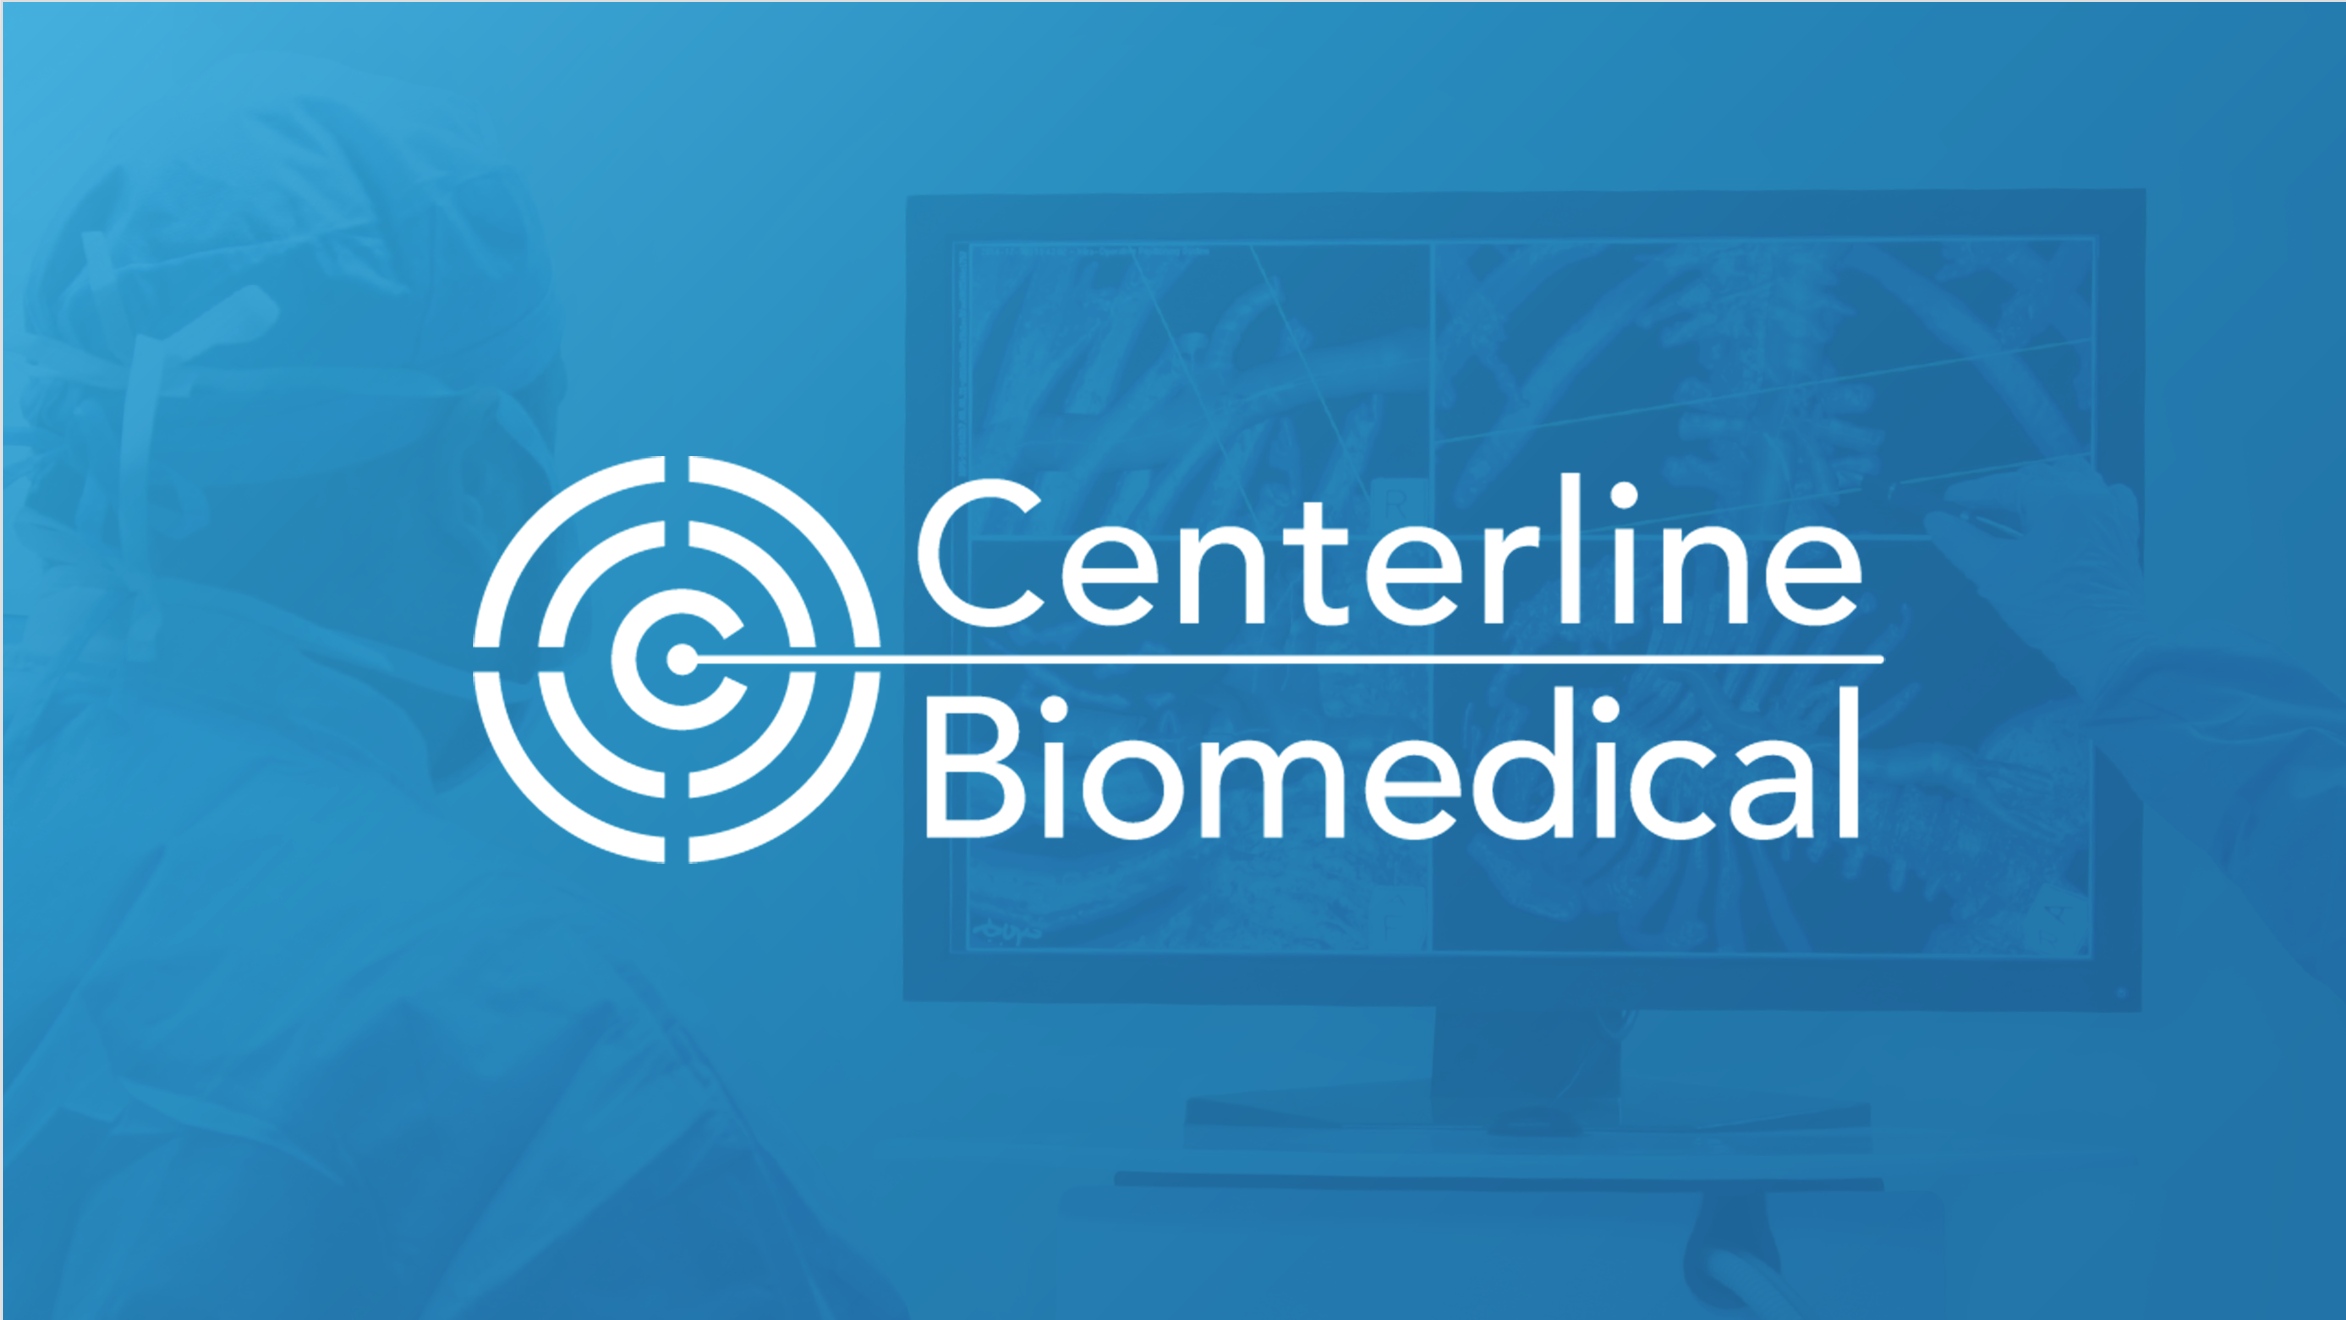 Centerline Biomedical Successfully Completes Next Set of Preclinical Studies